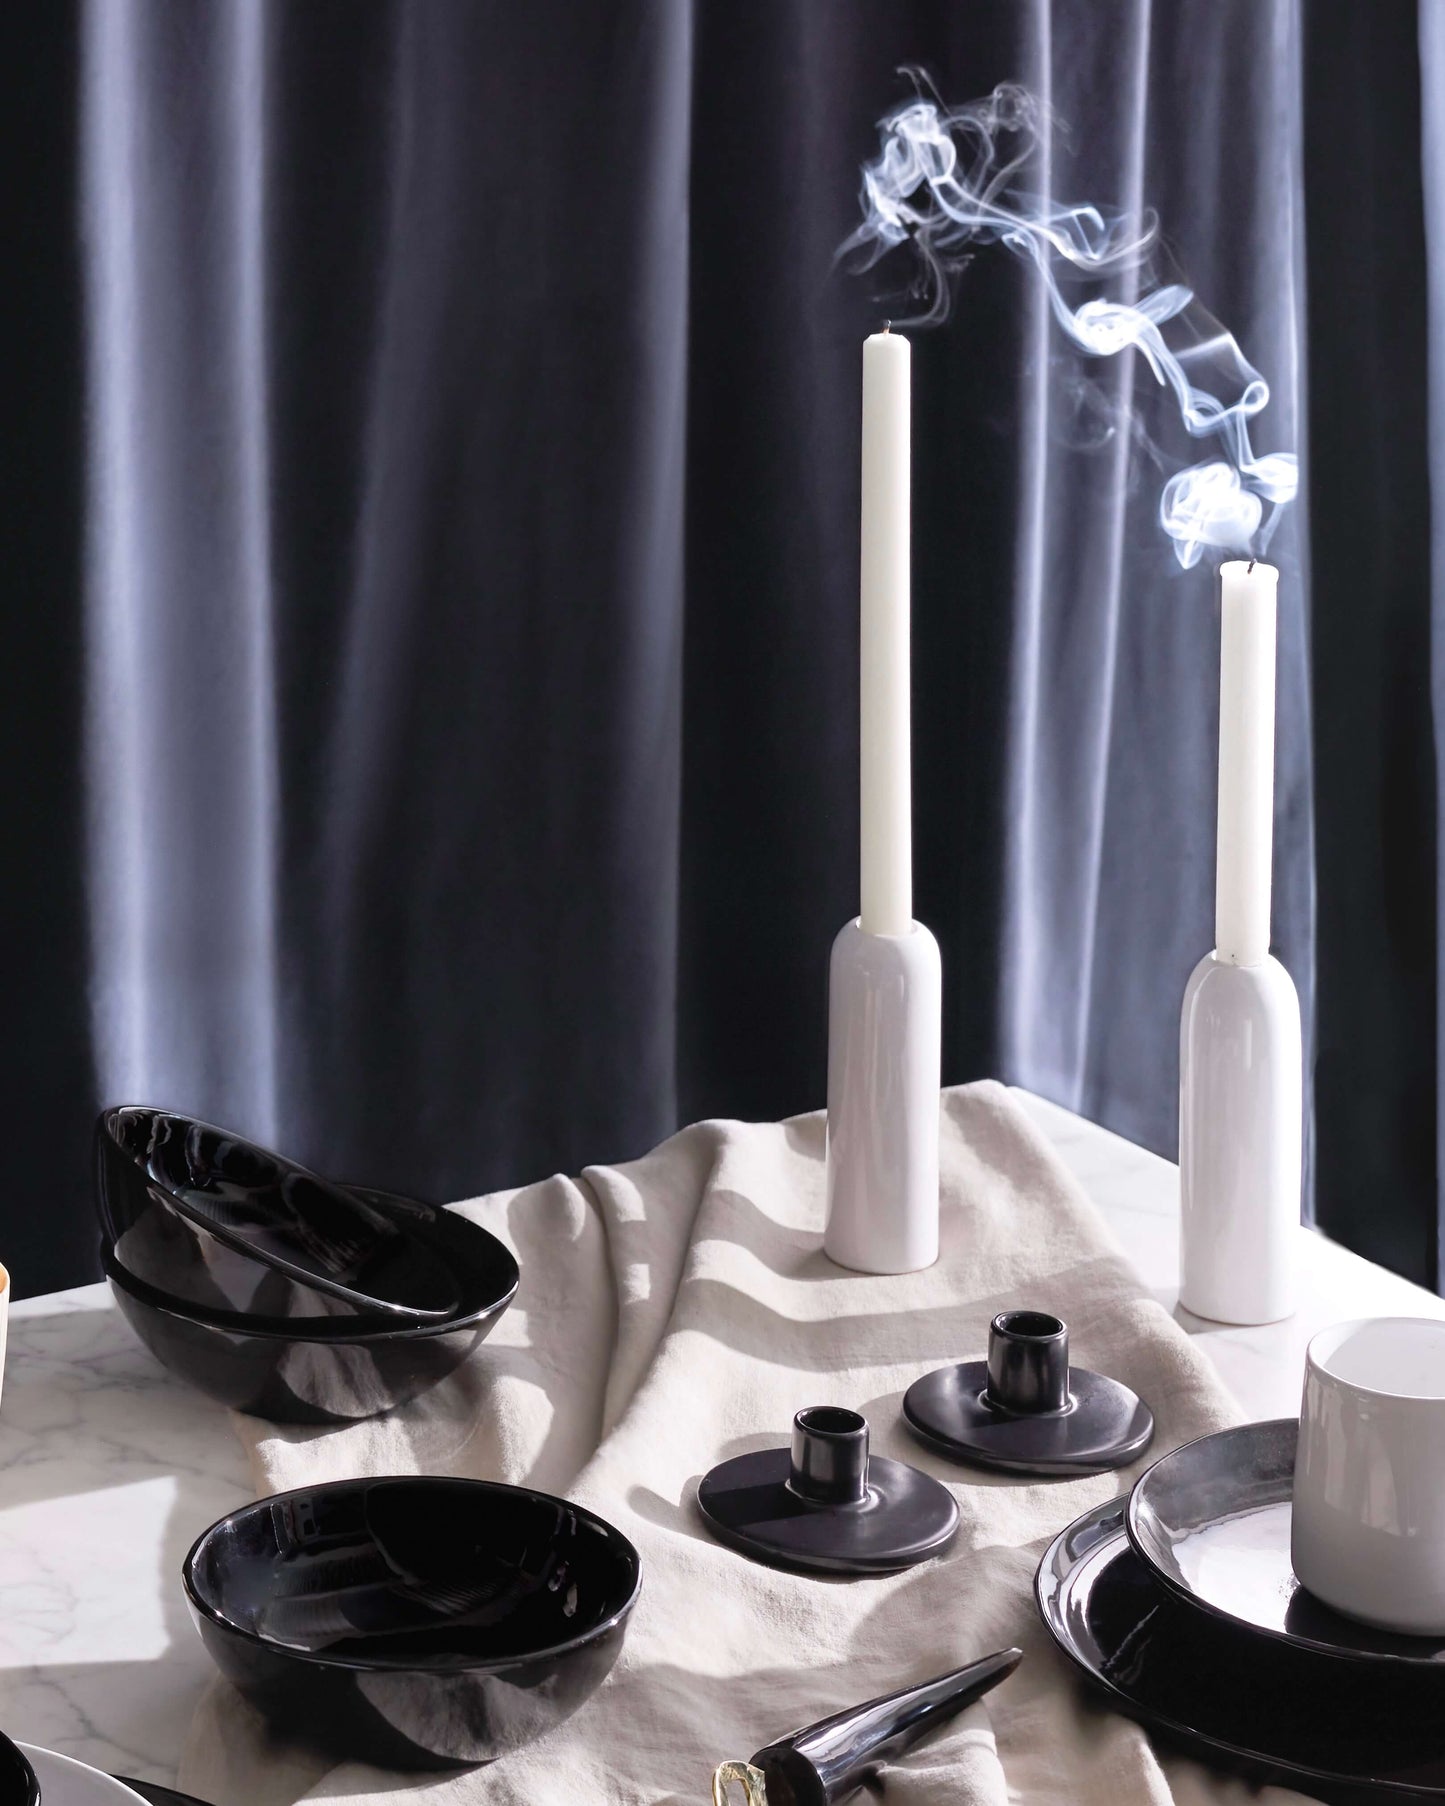 Luxury holiday table decor including glossy white ceramic taper holders with white candles and billowing smoke.